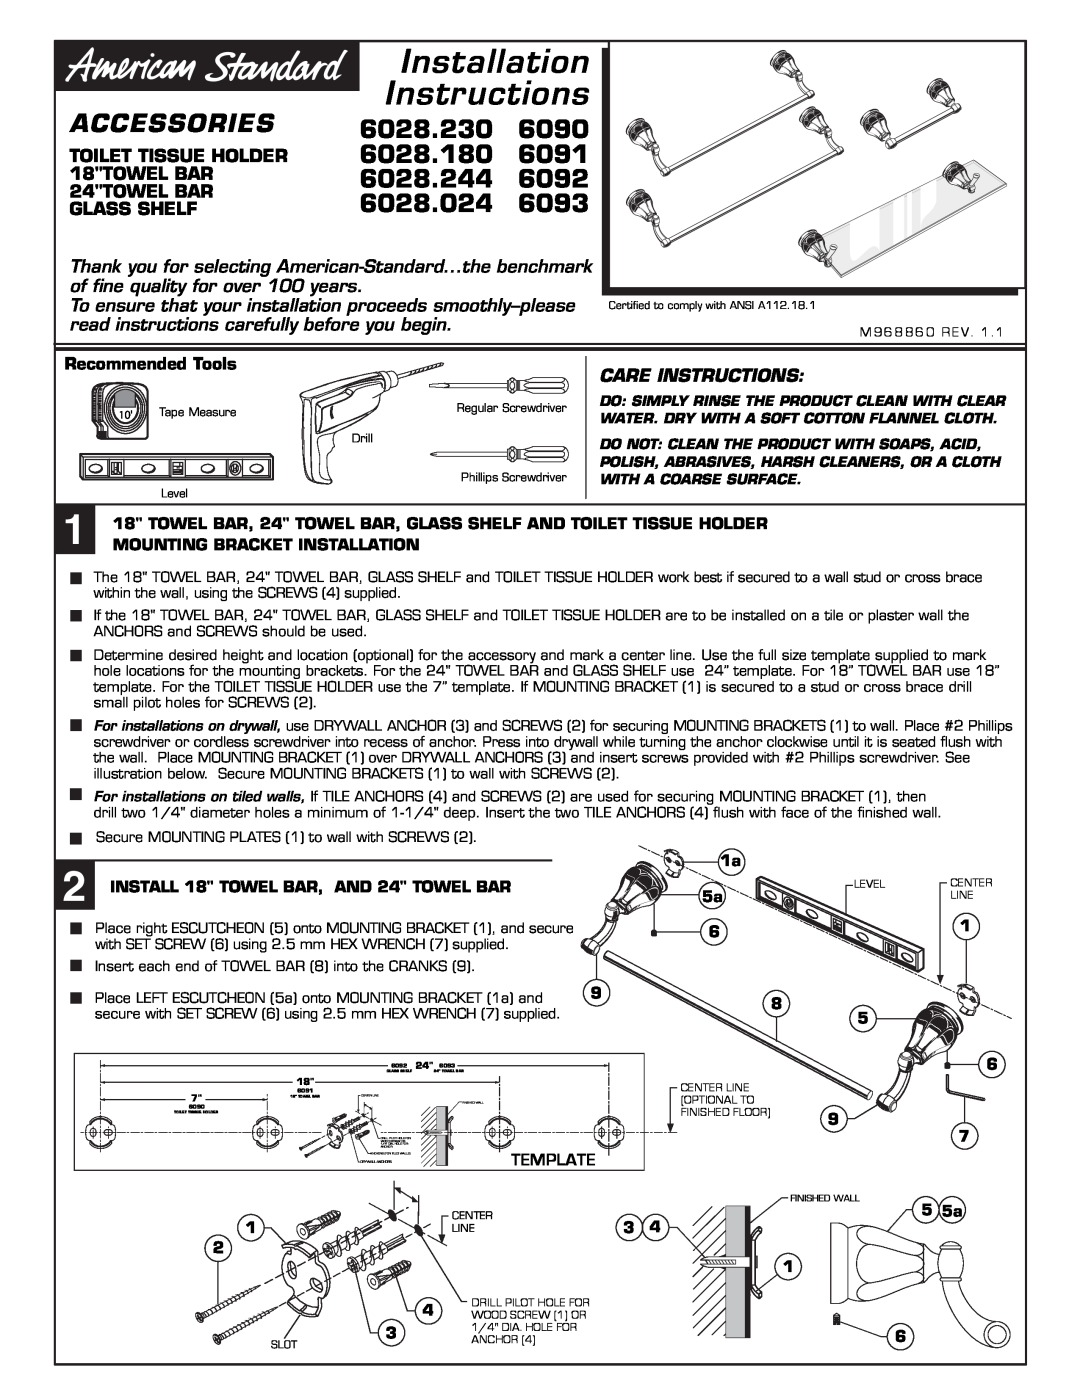 American Standard 2028.180 installation instructions Accessories, Recommended Tools, Template, Installation, Instructions 